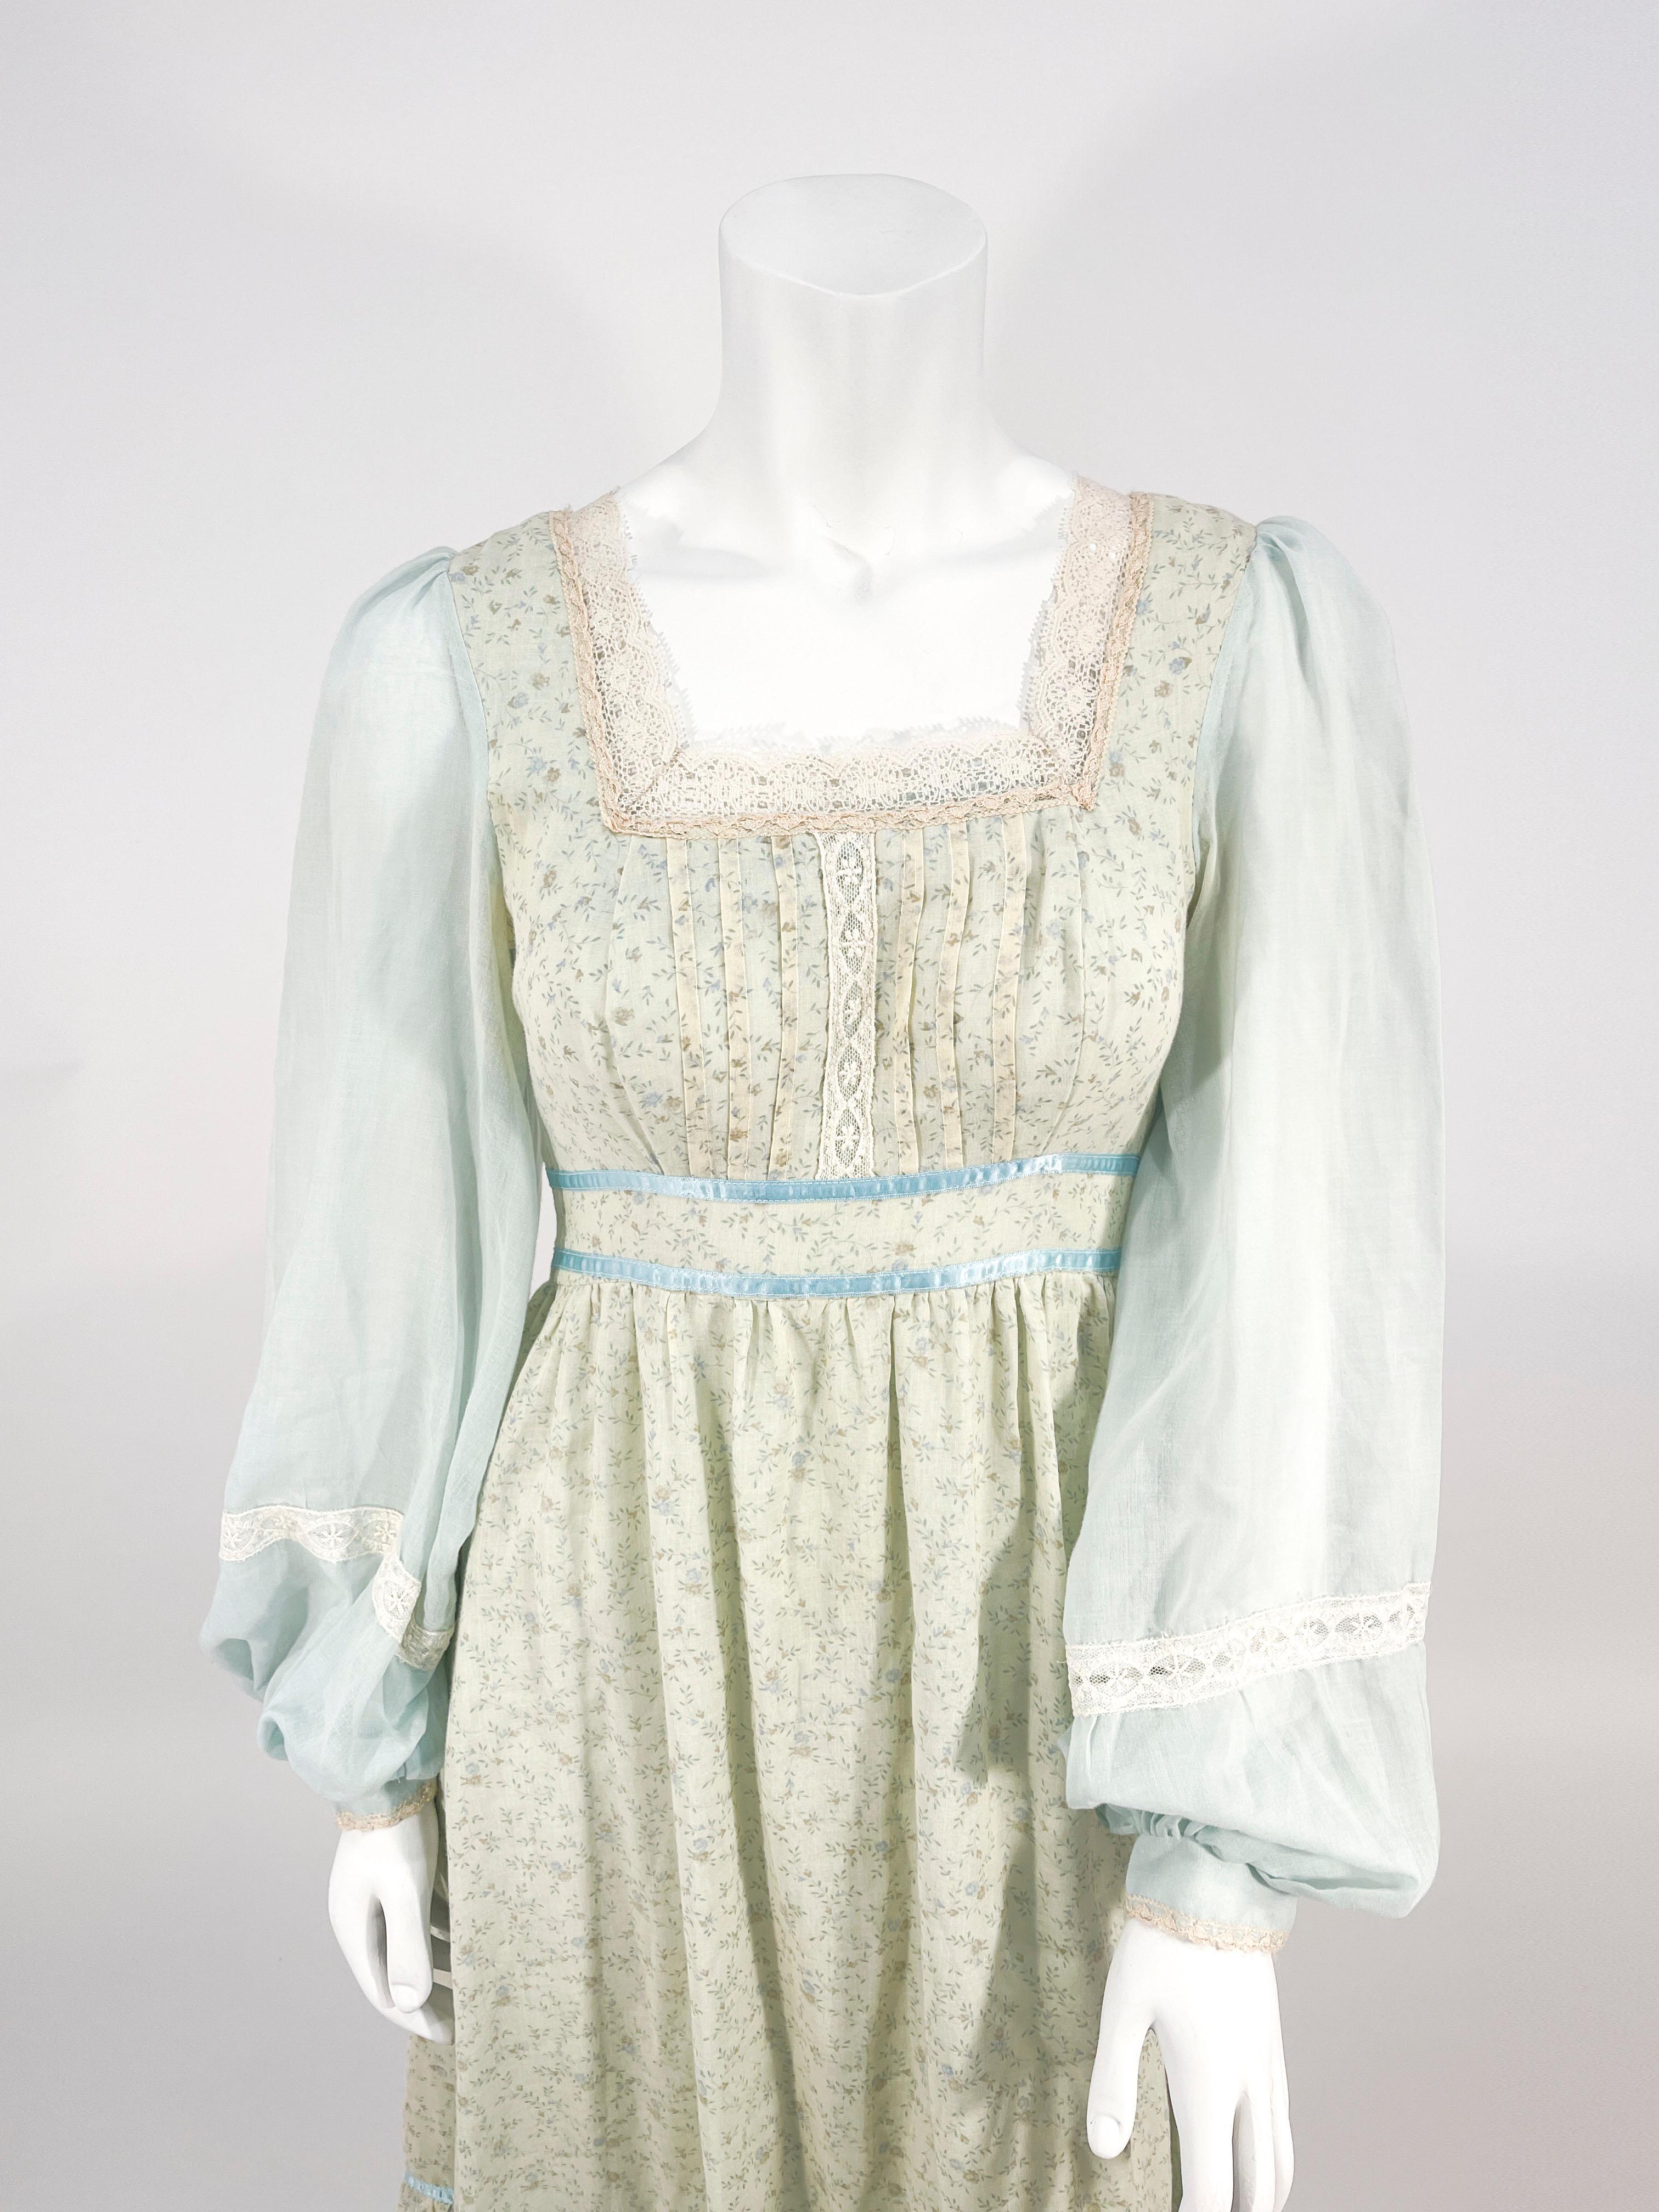 1970s Gunnel Sax cotton voile calf length prairie dress in a robin's egg blue and beige calico printed overskirt/bust. The belted back waist is trimmed with a matching blue satin along with the overskirt ruffled hem.  The square neckline and the